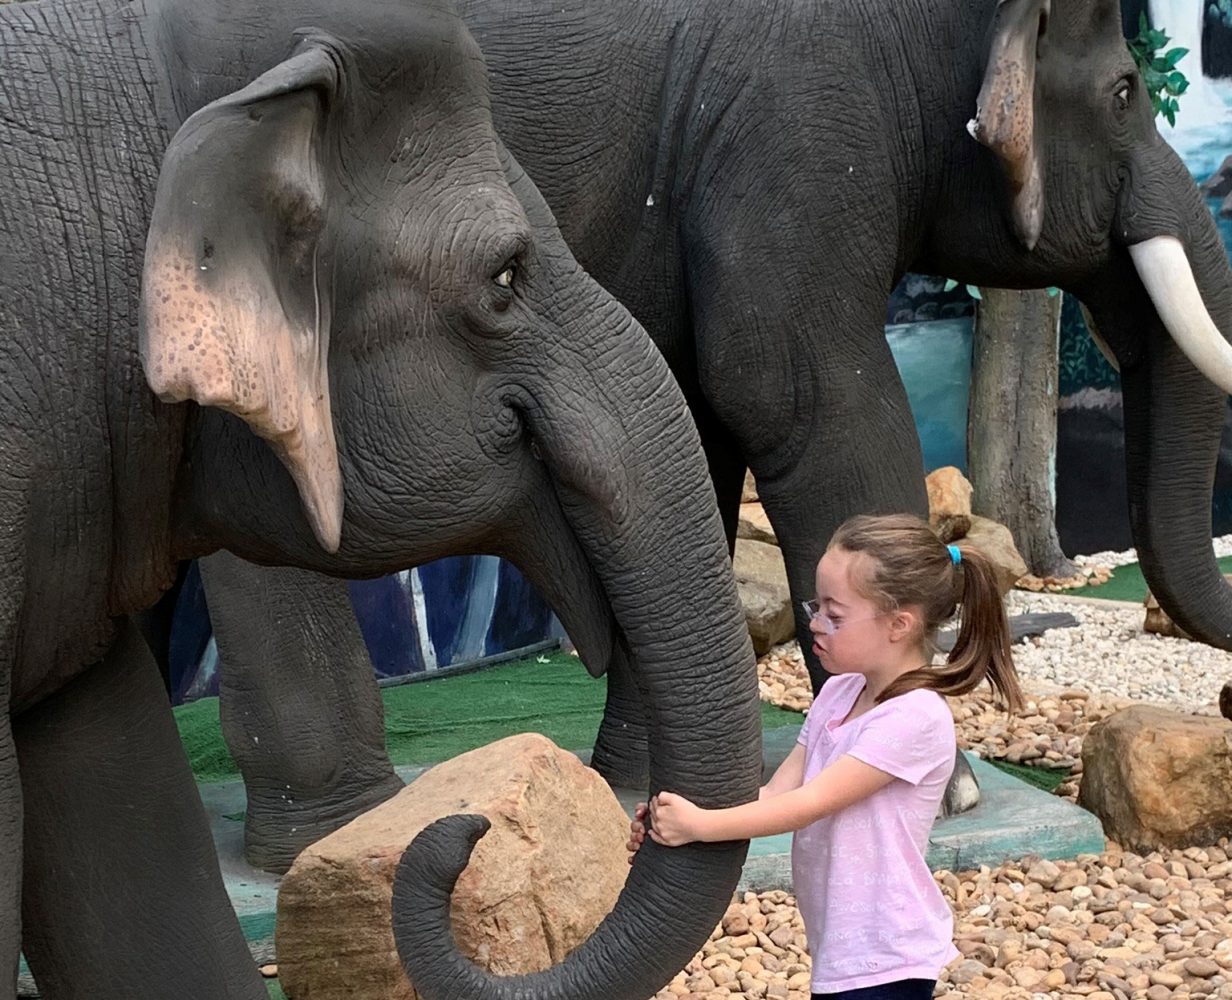 Girl with Down syndrome holds elephant's trunk